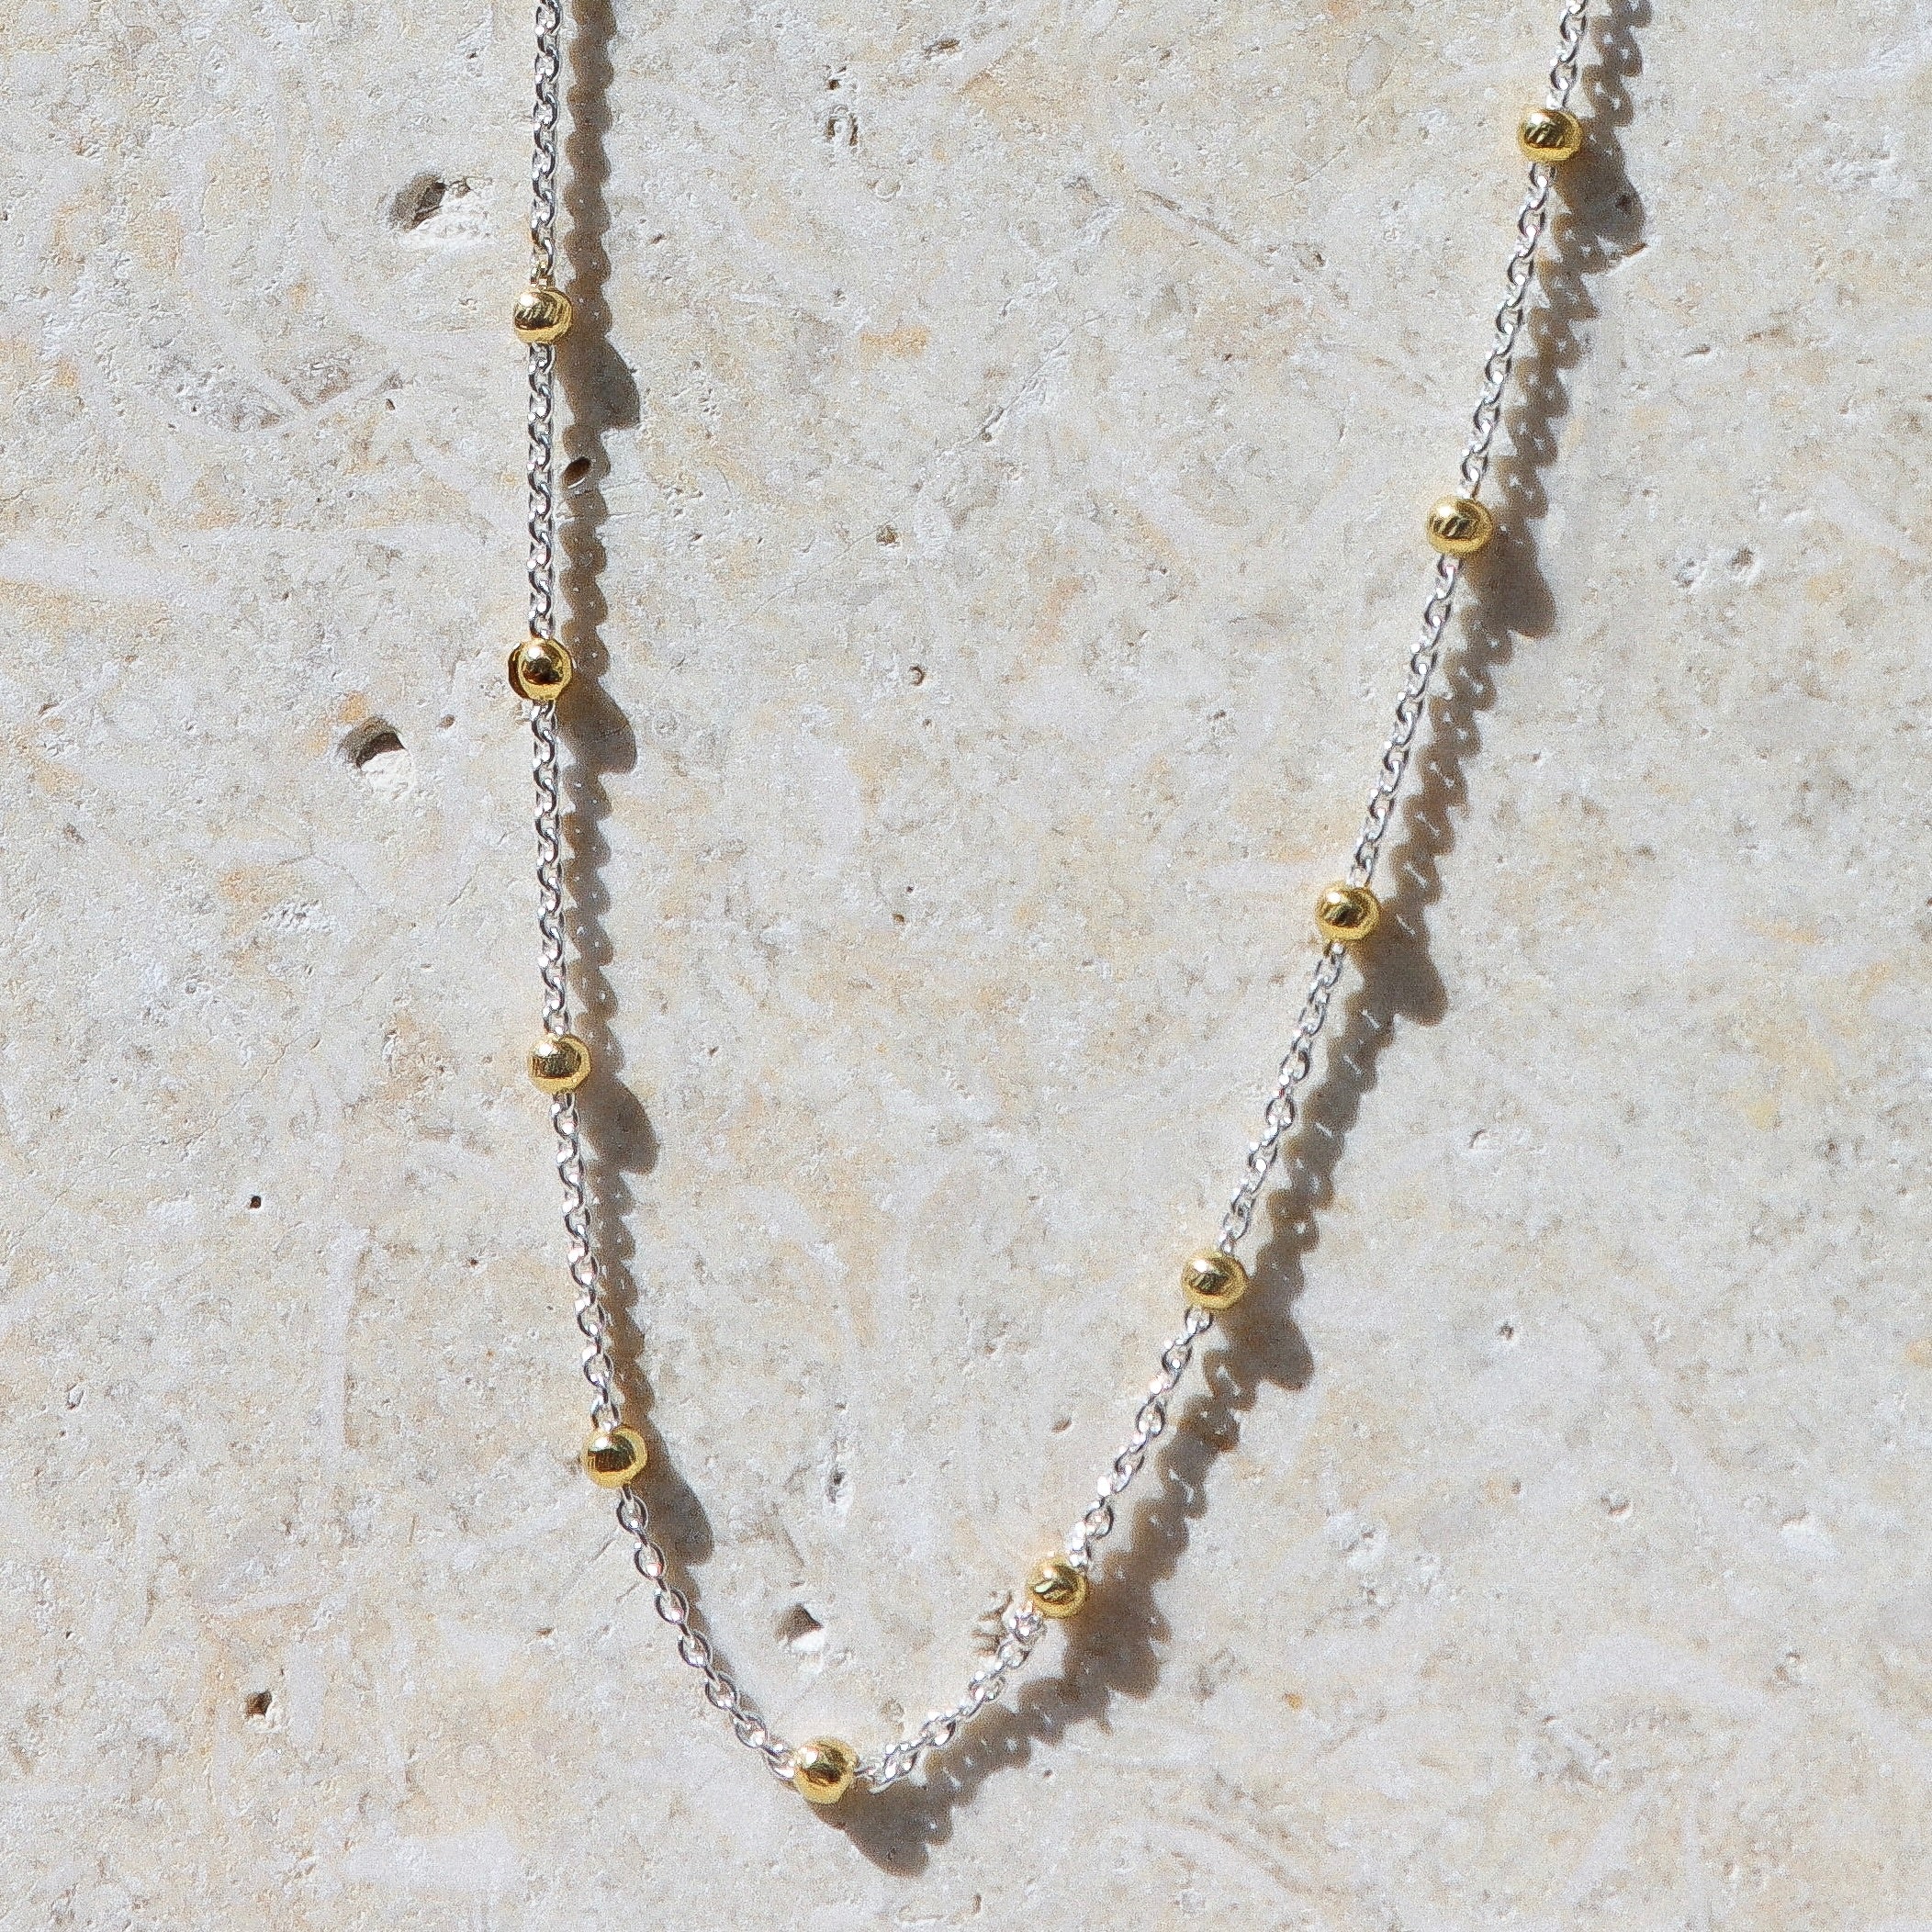 Najo Alogonquin Necklace Yellow Gold Plated #